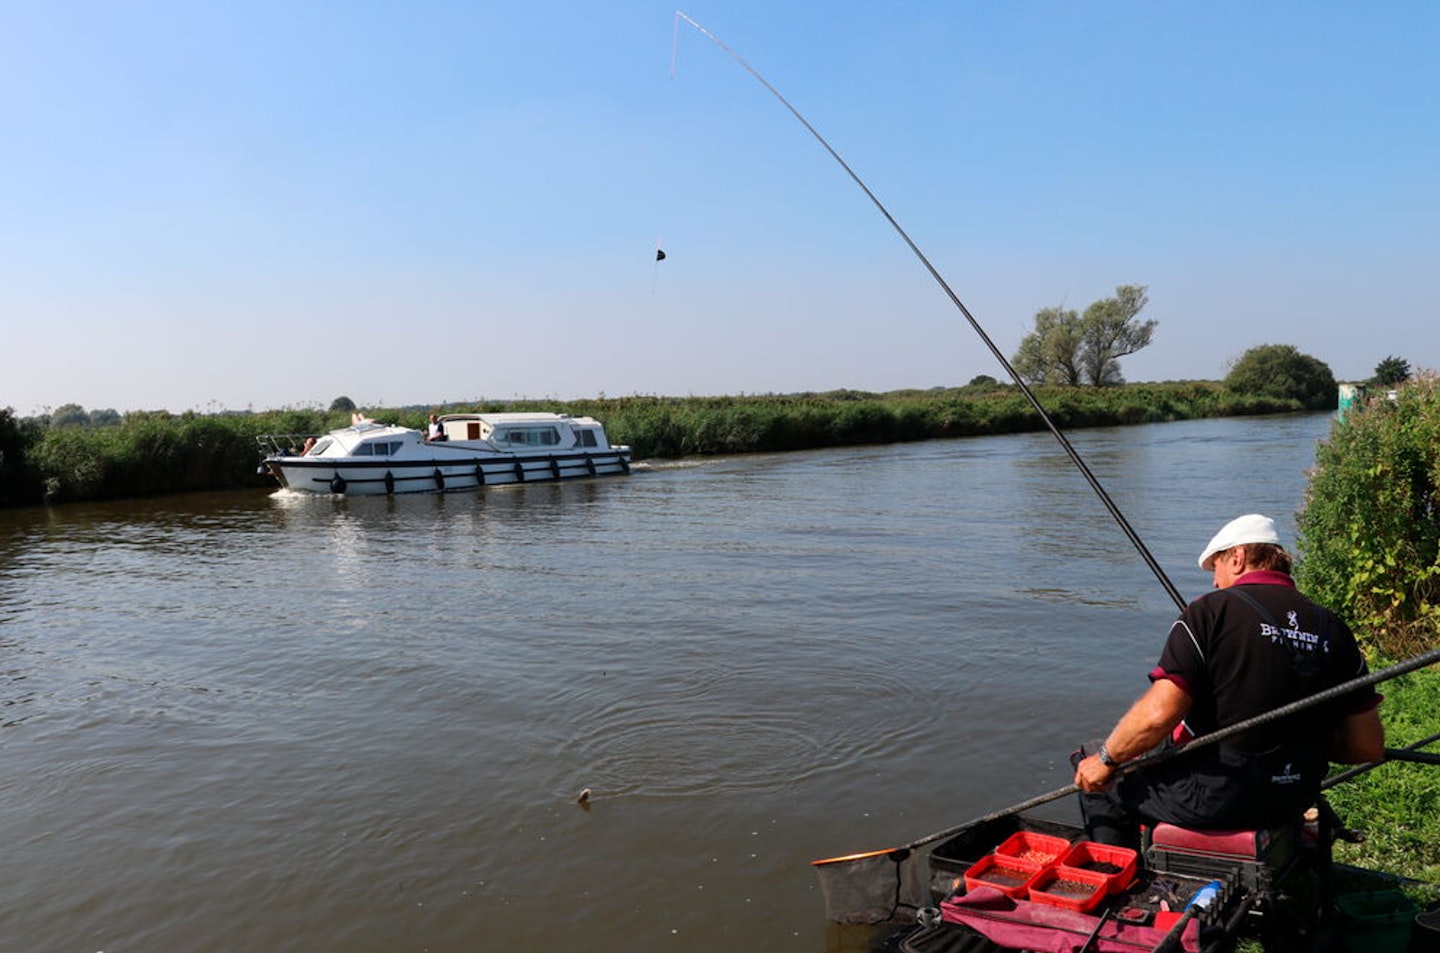 Today, flat floats are regularly used to run the bait with the river’s current and catch smaller fish